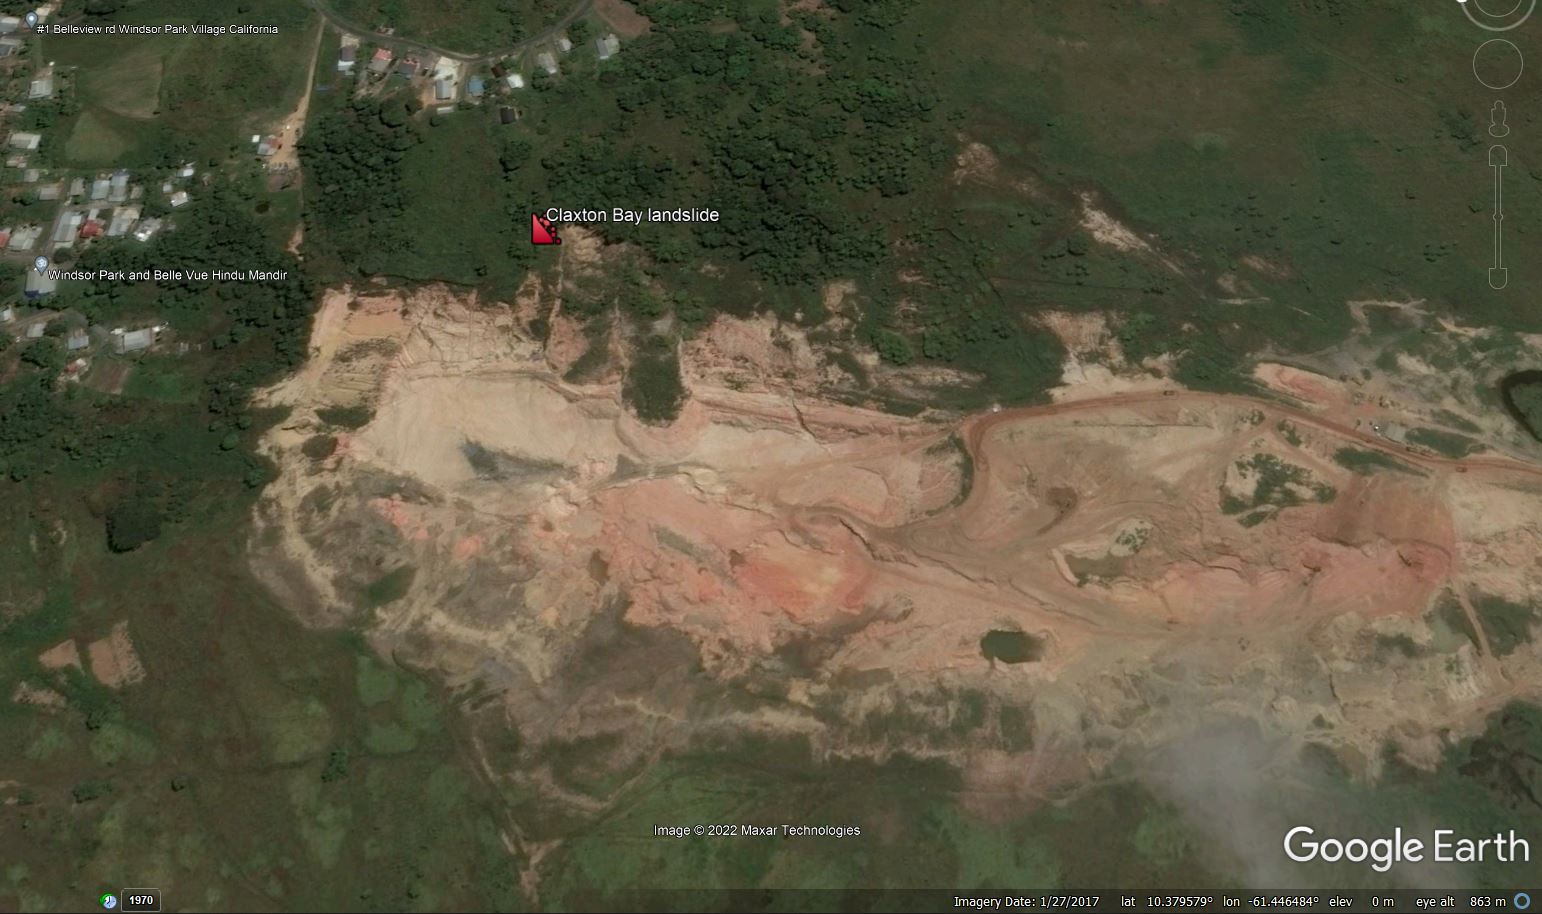 Google Earth image of the site of the Claxton Bay landslide in Trinidad, collected in January 2017, before the landslide retrogressed to affect the houses.